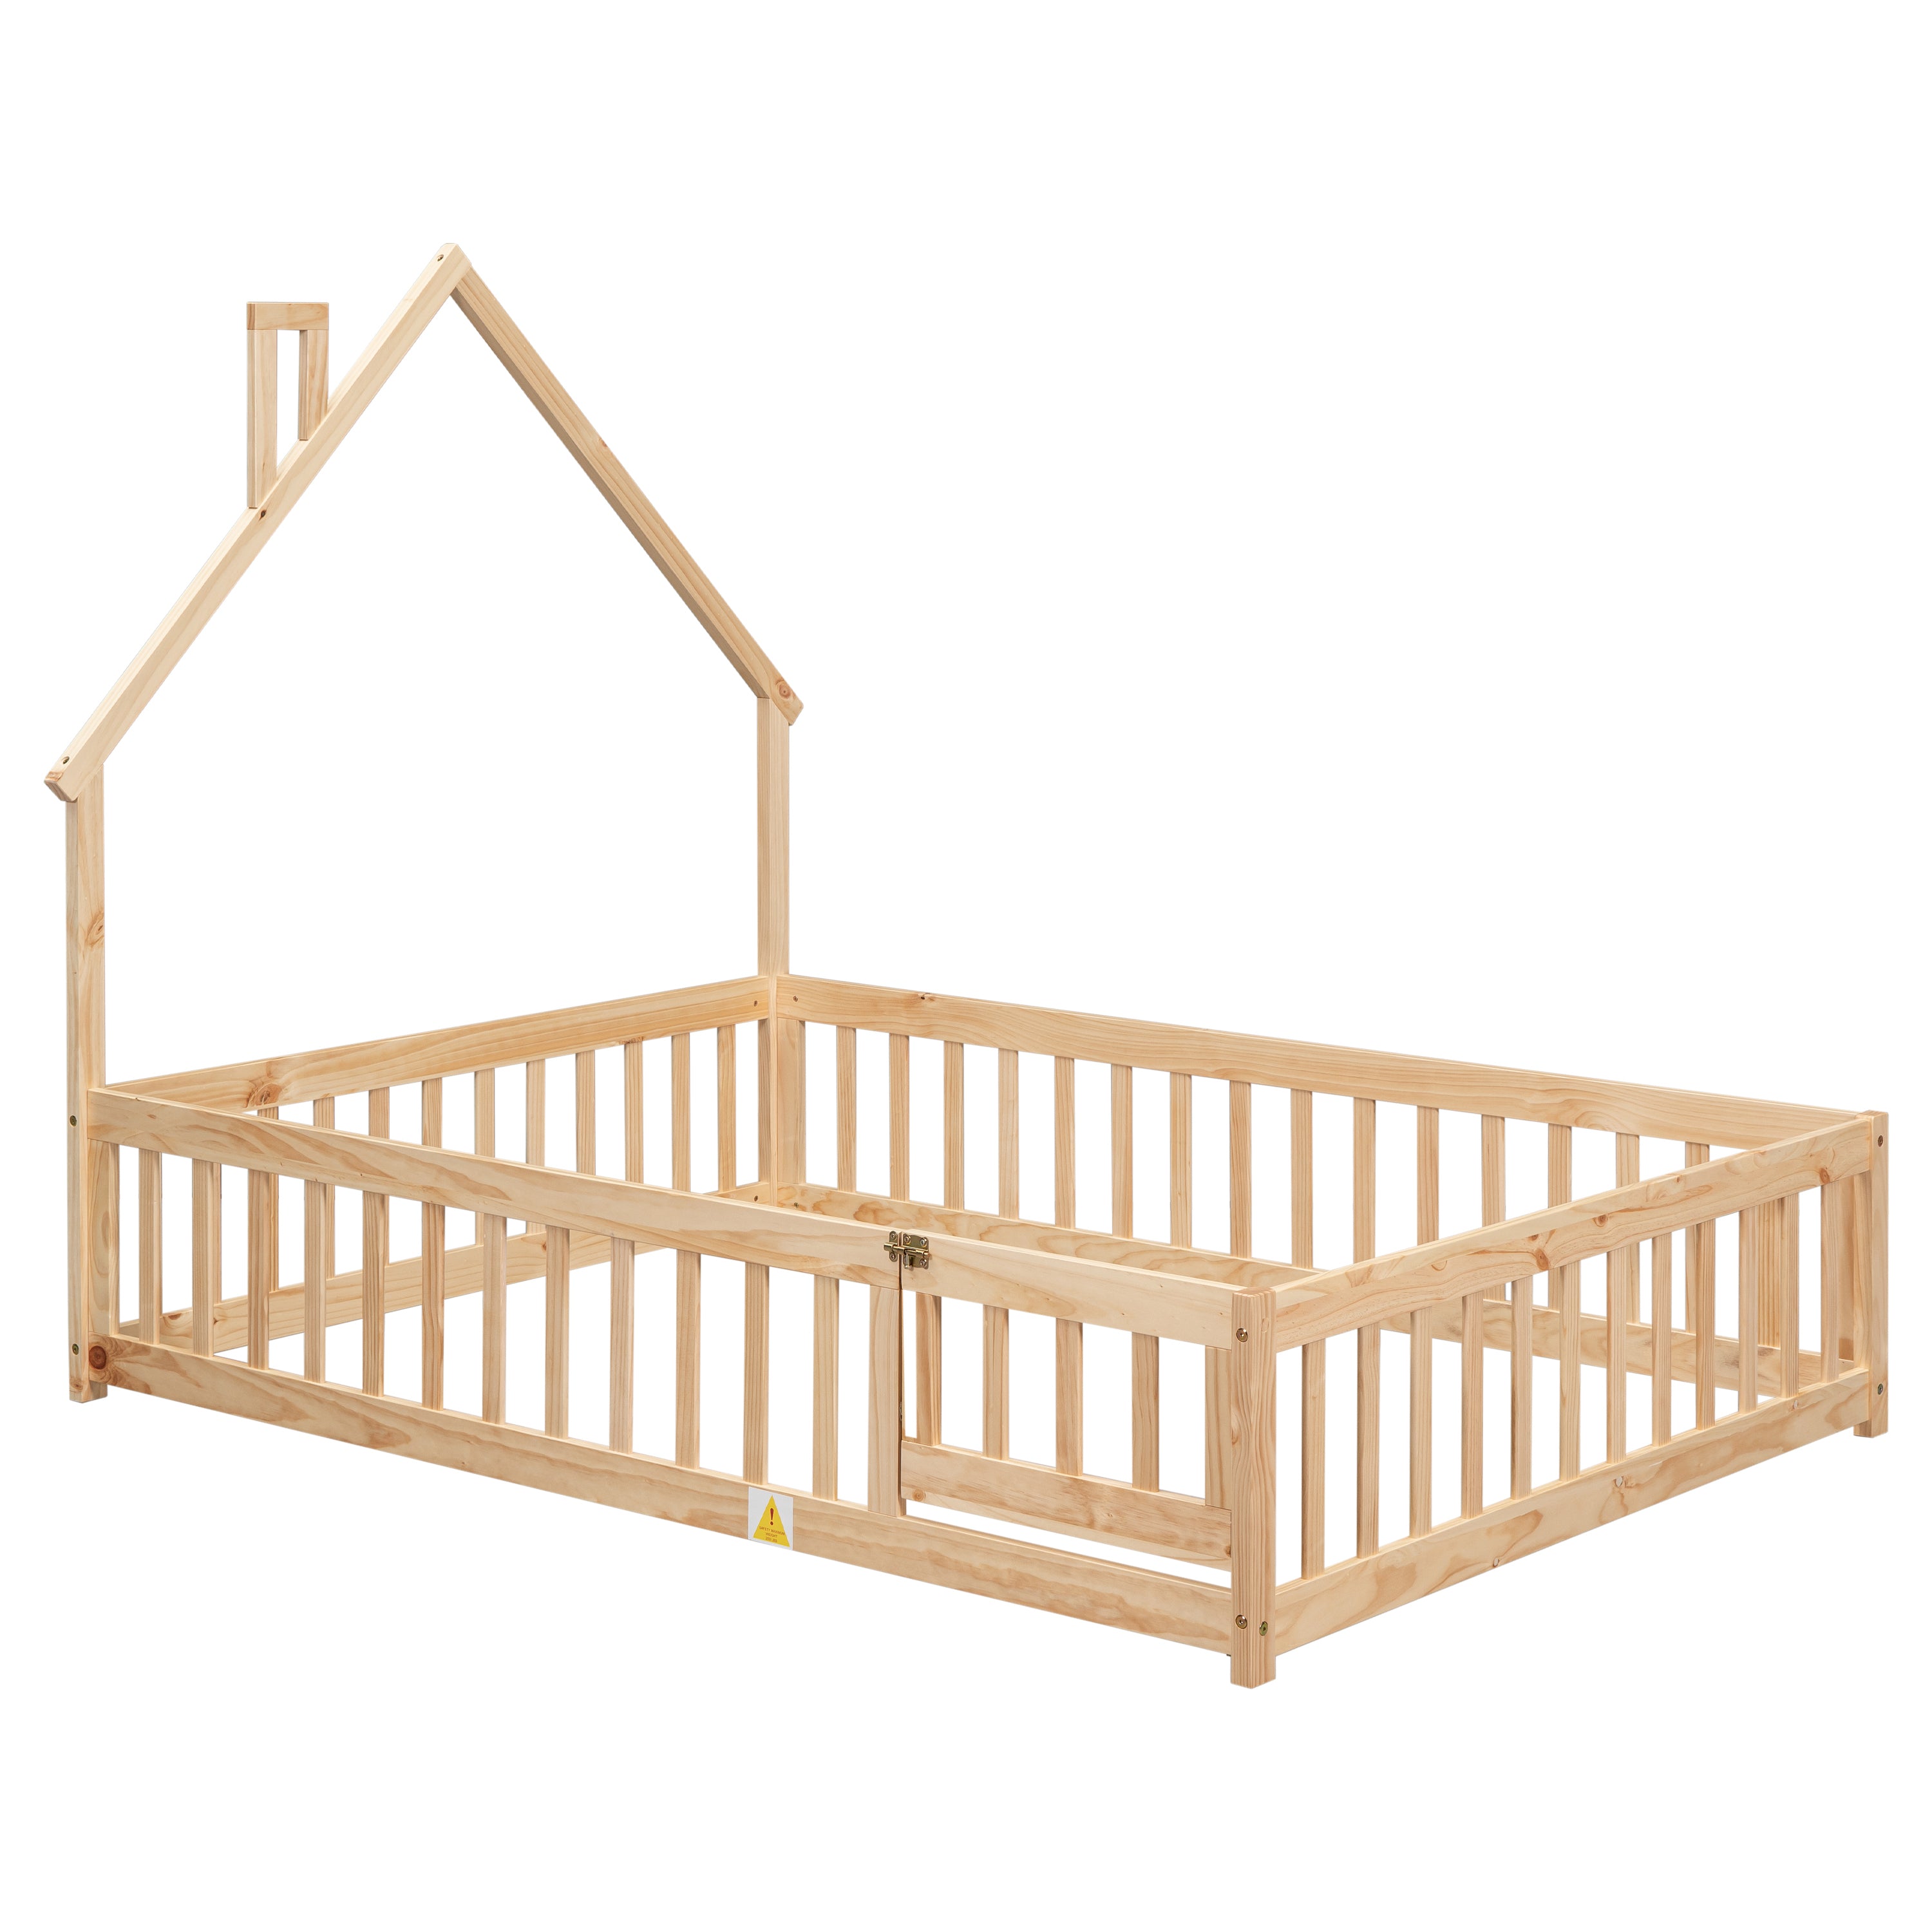 Full House-Shaped Headboard Floor Bed with Fence,Natural